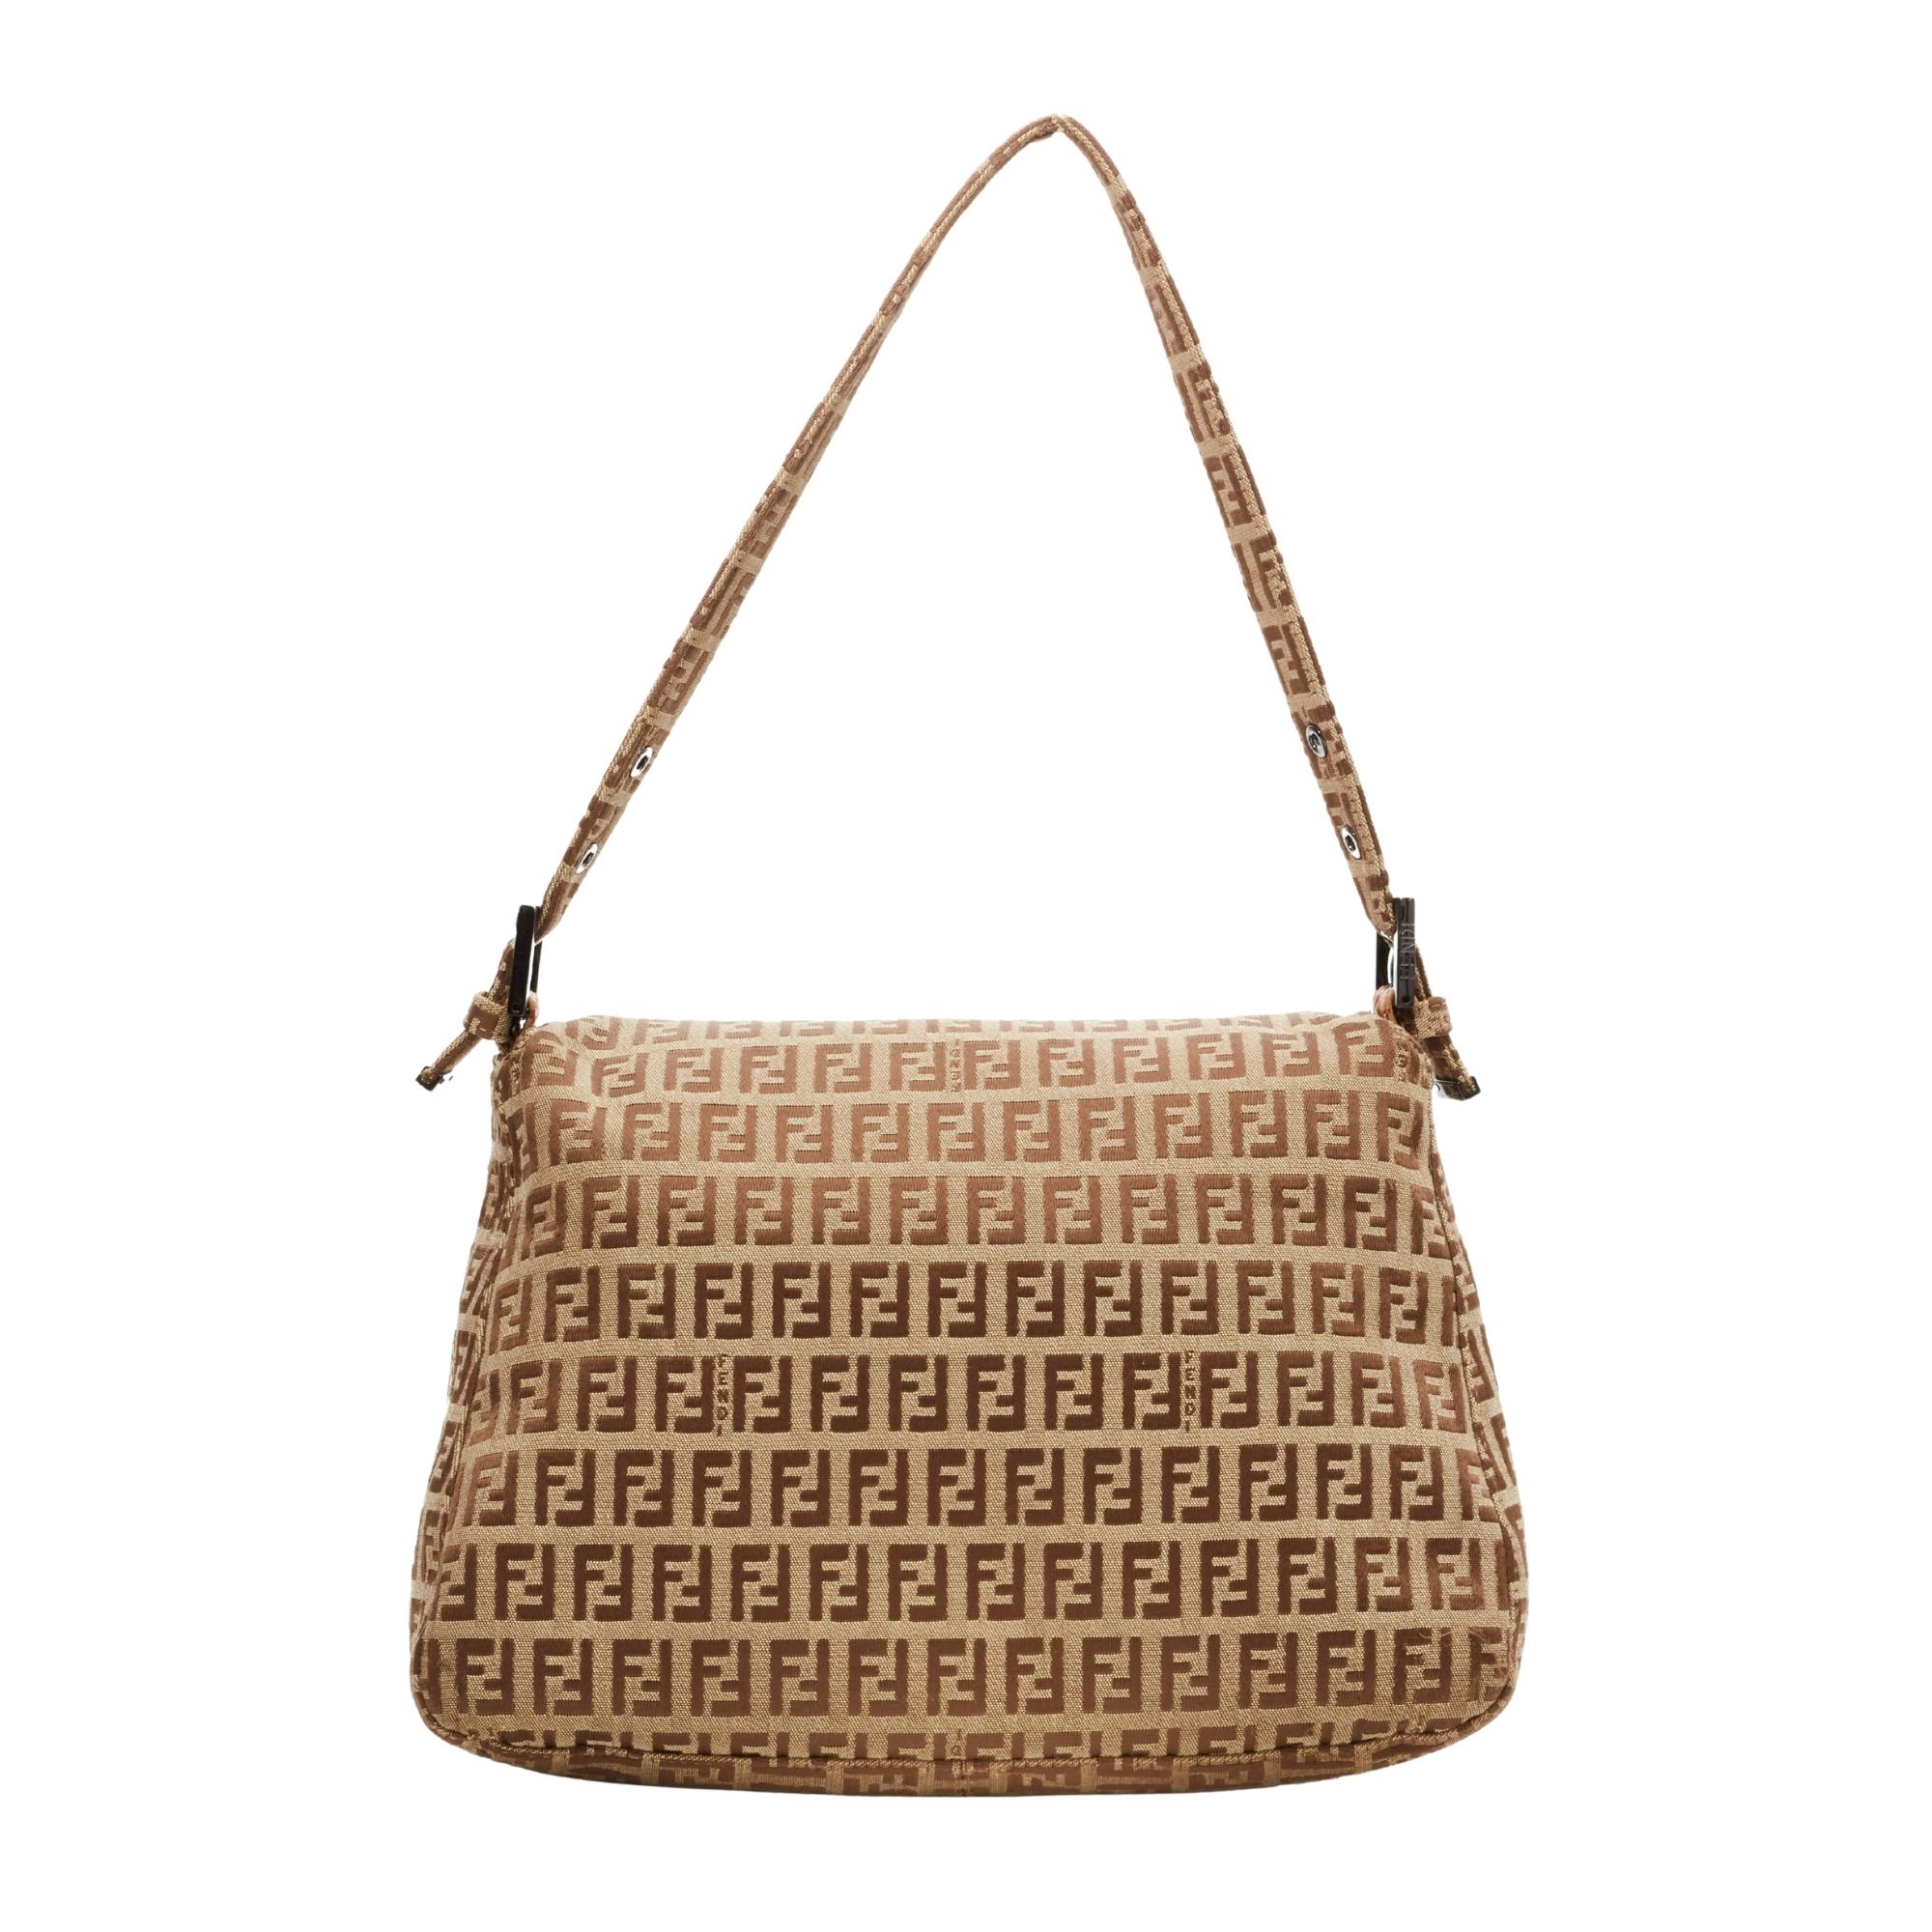 This Mama baguette is made with beige canvas with brown Fendi Zuccino embossing throughout. The bag features an adjustable looping cloth strap, gunmetal silver buckle links for the top strap and a front leather strap with a polished silver FF logo.